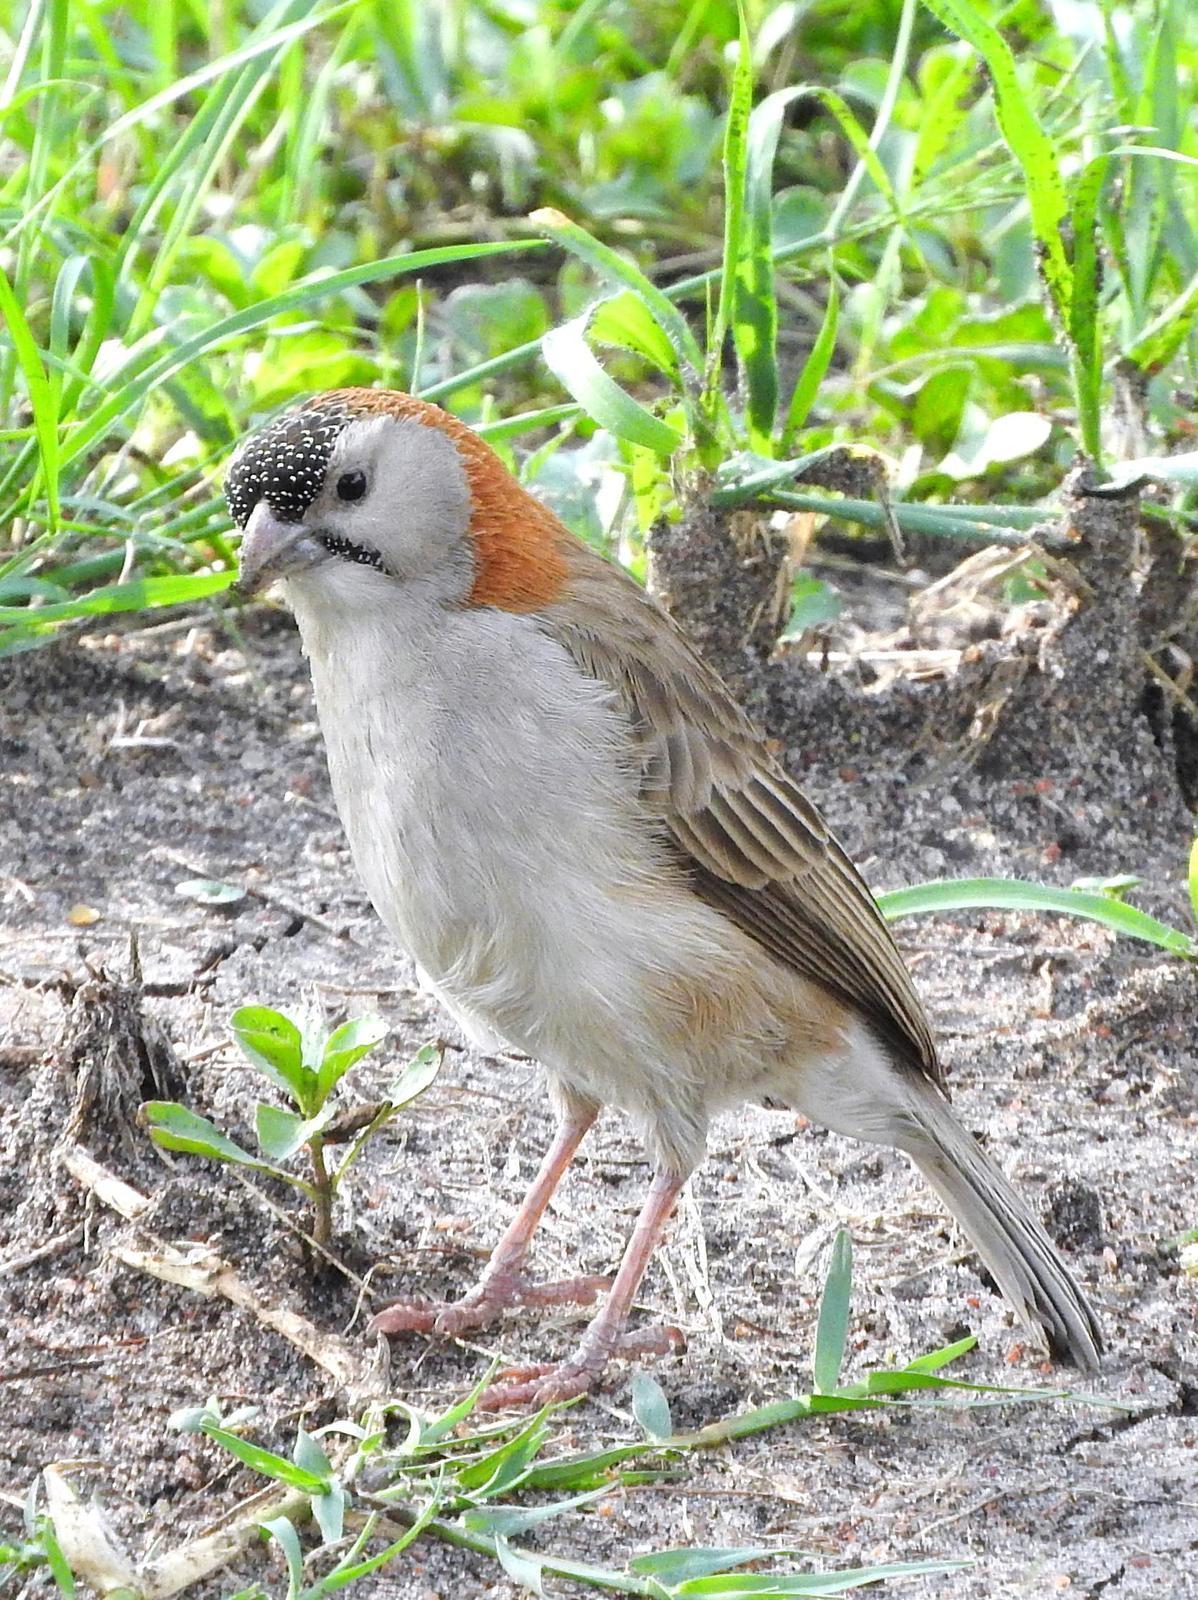 Speckle-fronted Weaver Photo by Todd A. Watkins